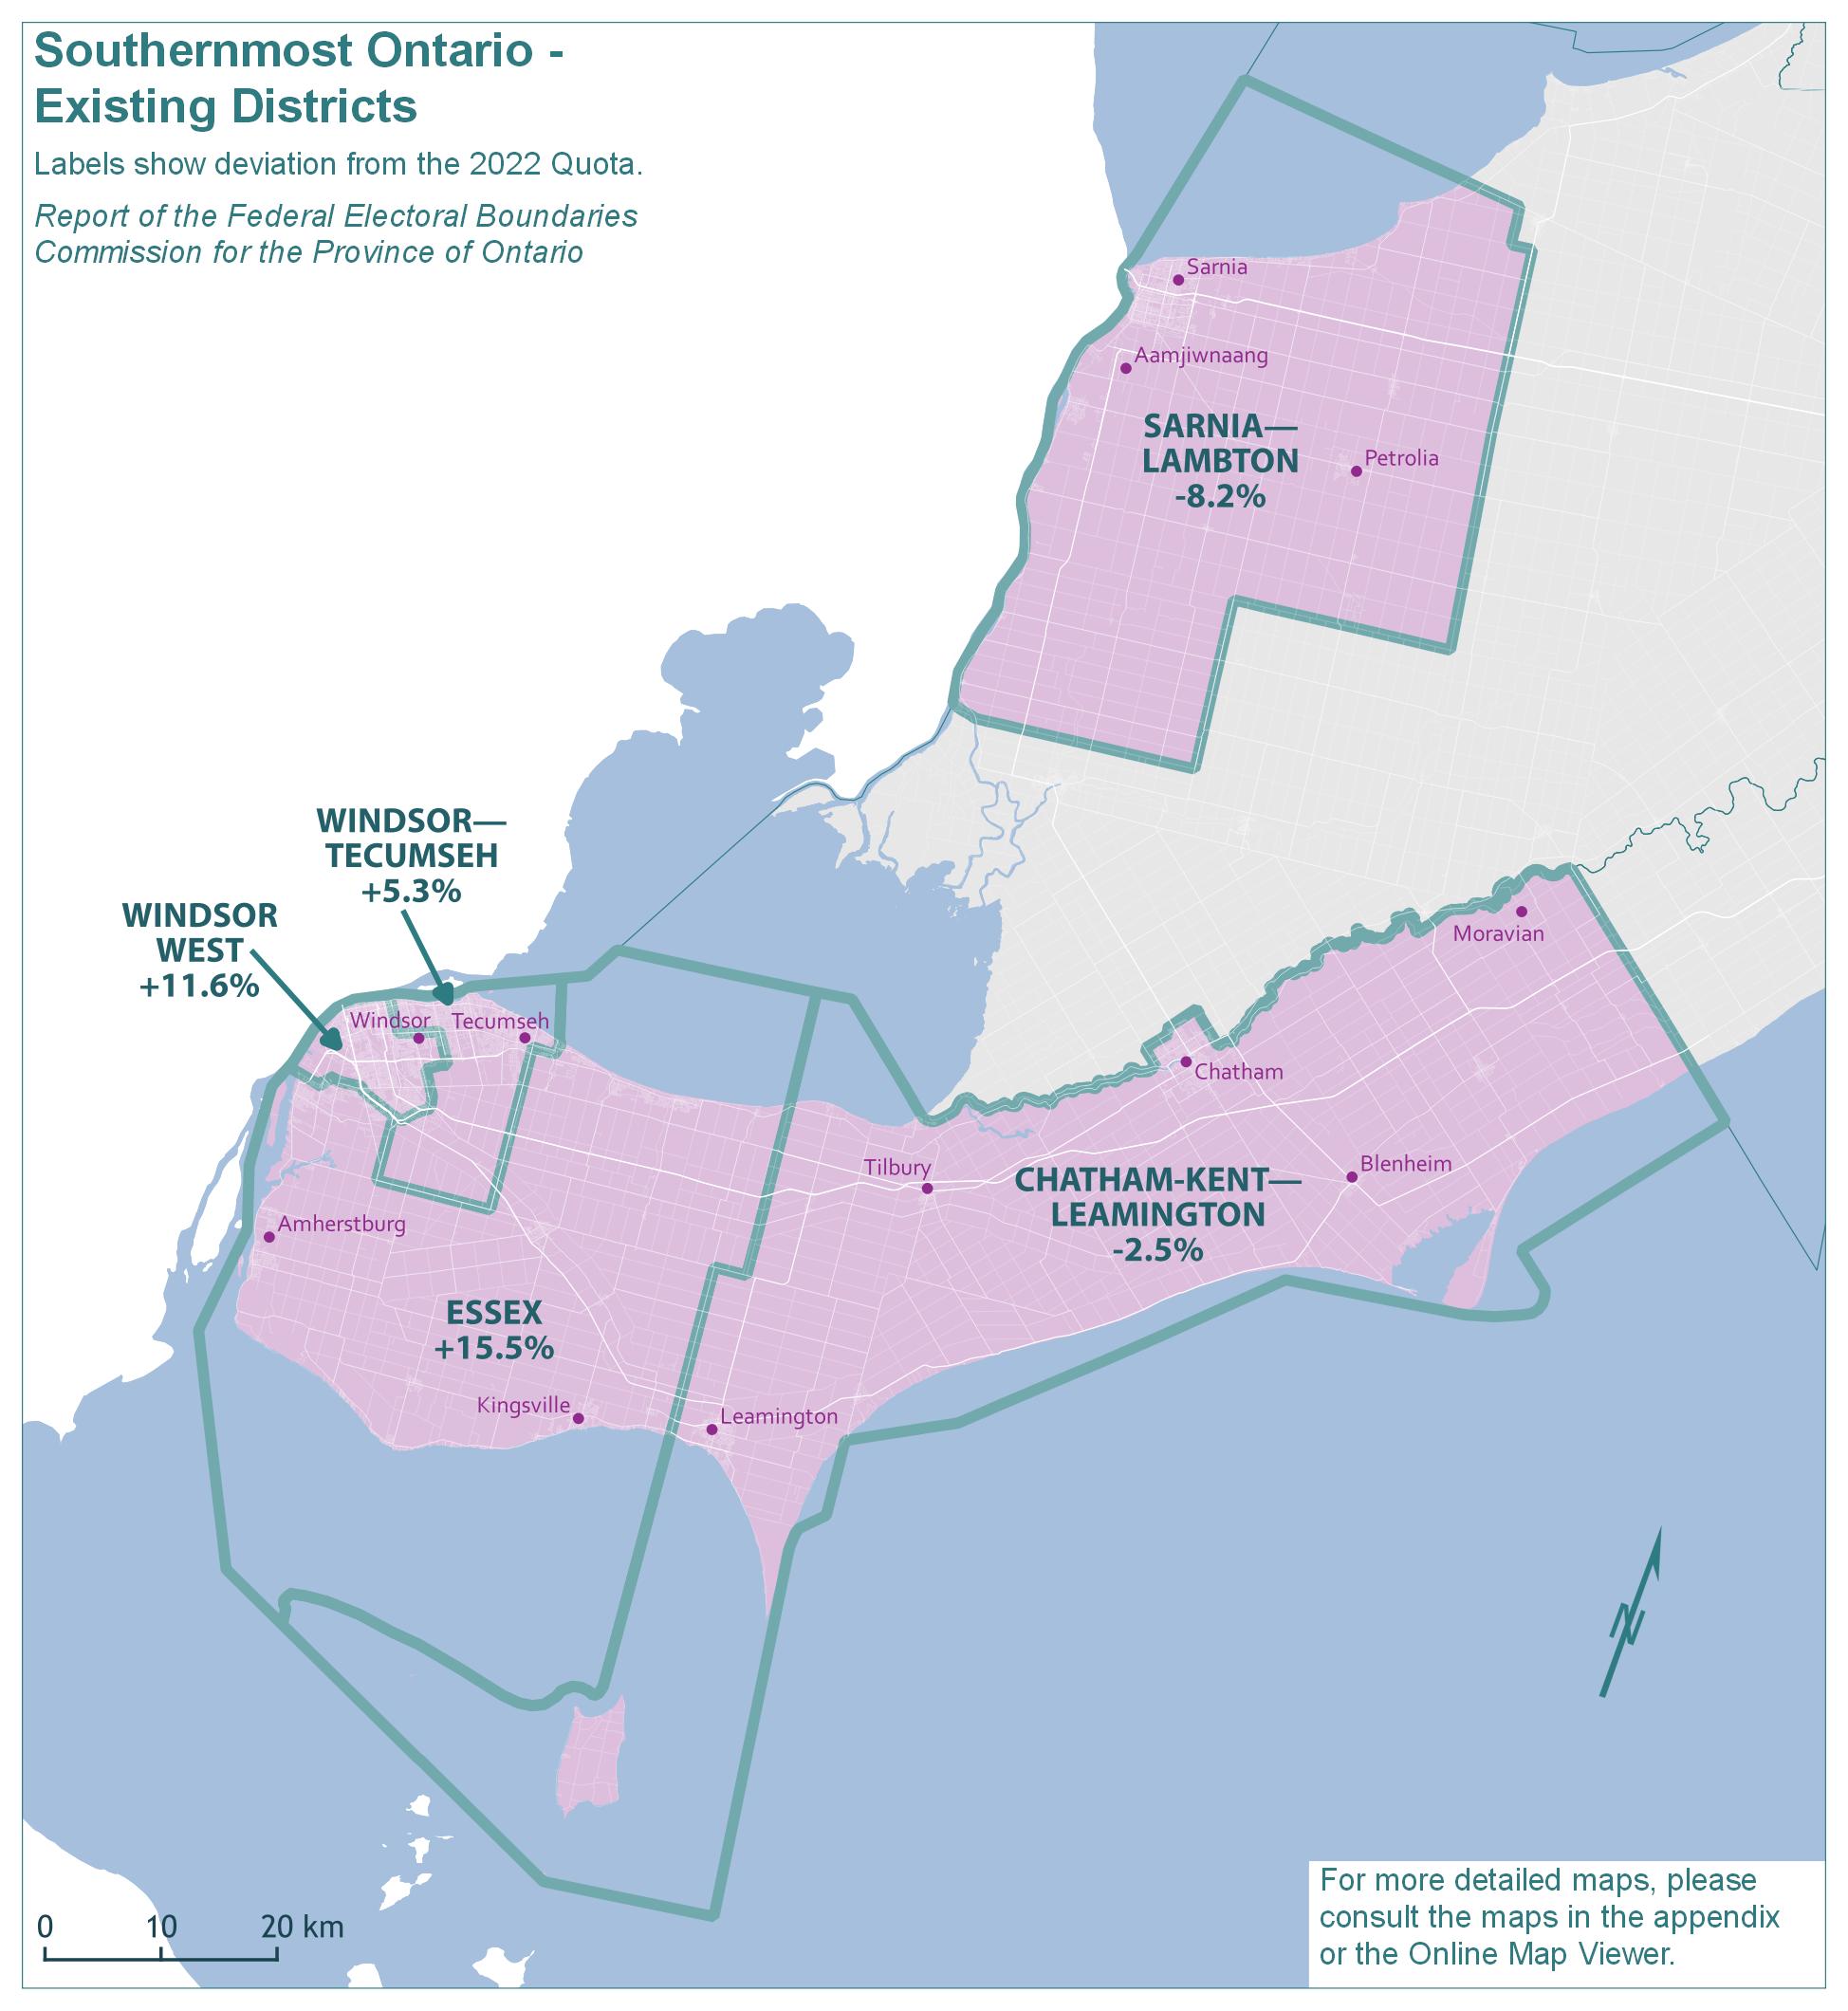 Southernmost Ontario - Existing Districts